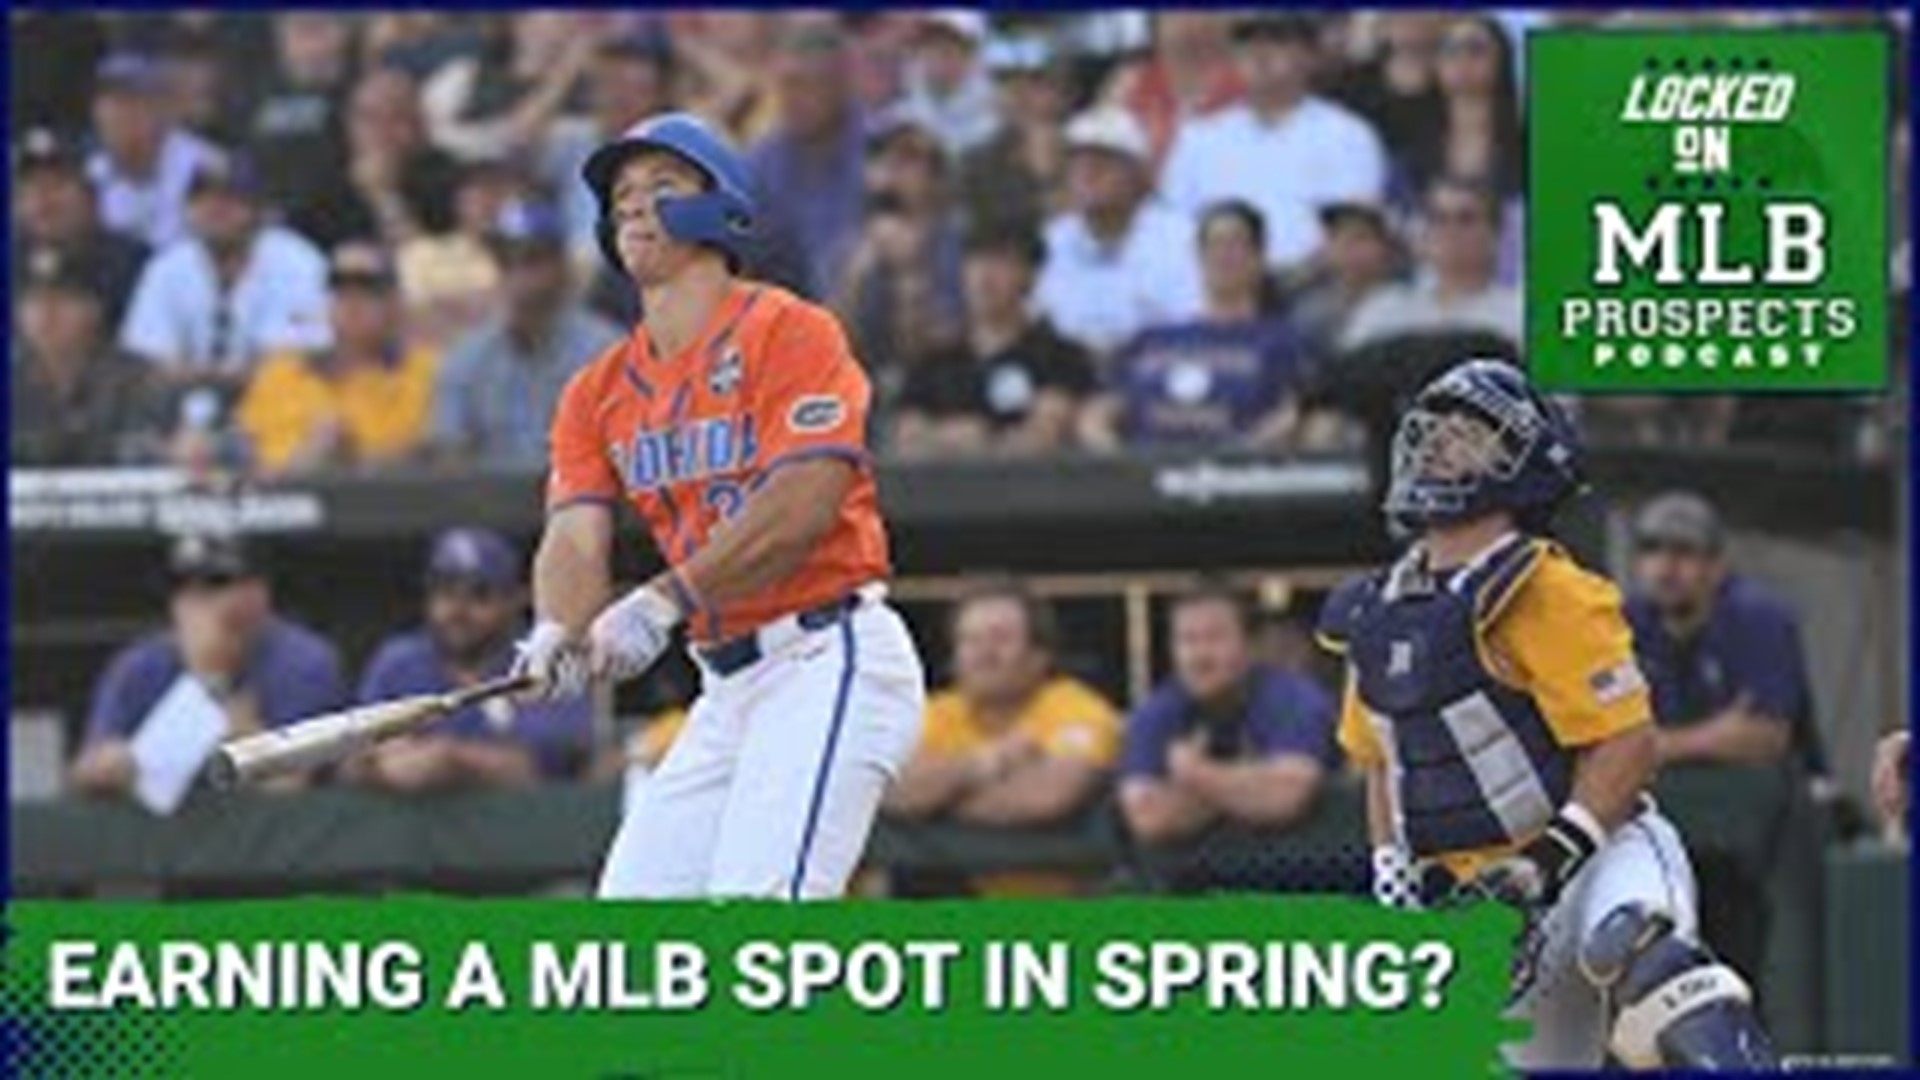 Join Lindsay Crosby from Locked On MLB Prospects as he dives into the prospects to watch in spring training. Spotlighting players such as Jackson Chourio, Colt Keith